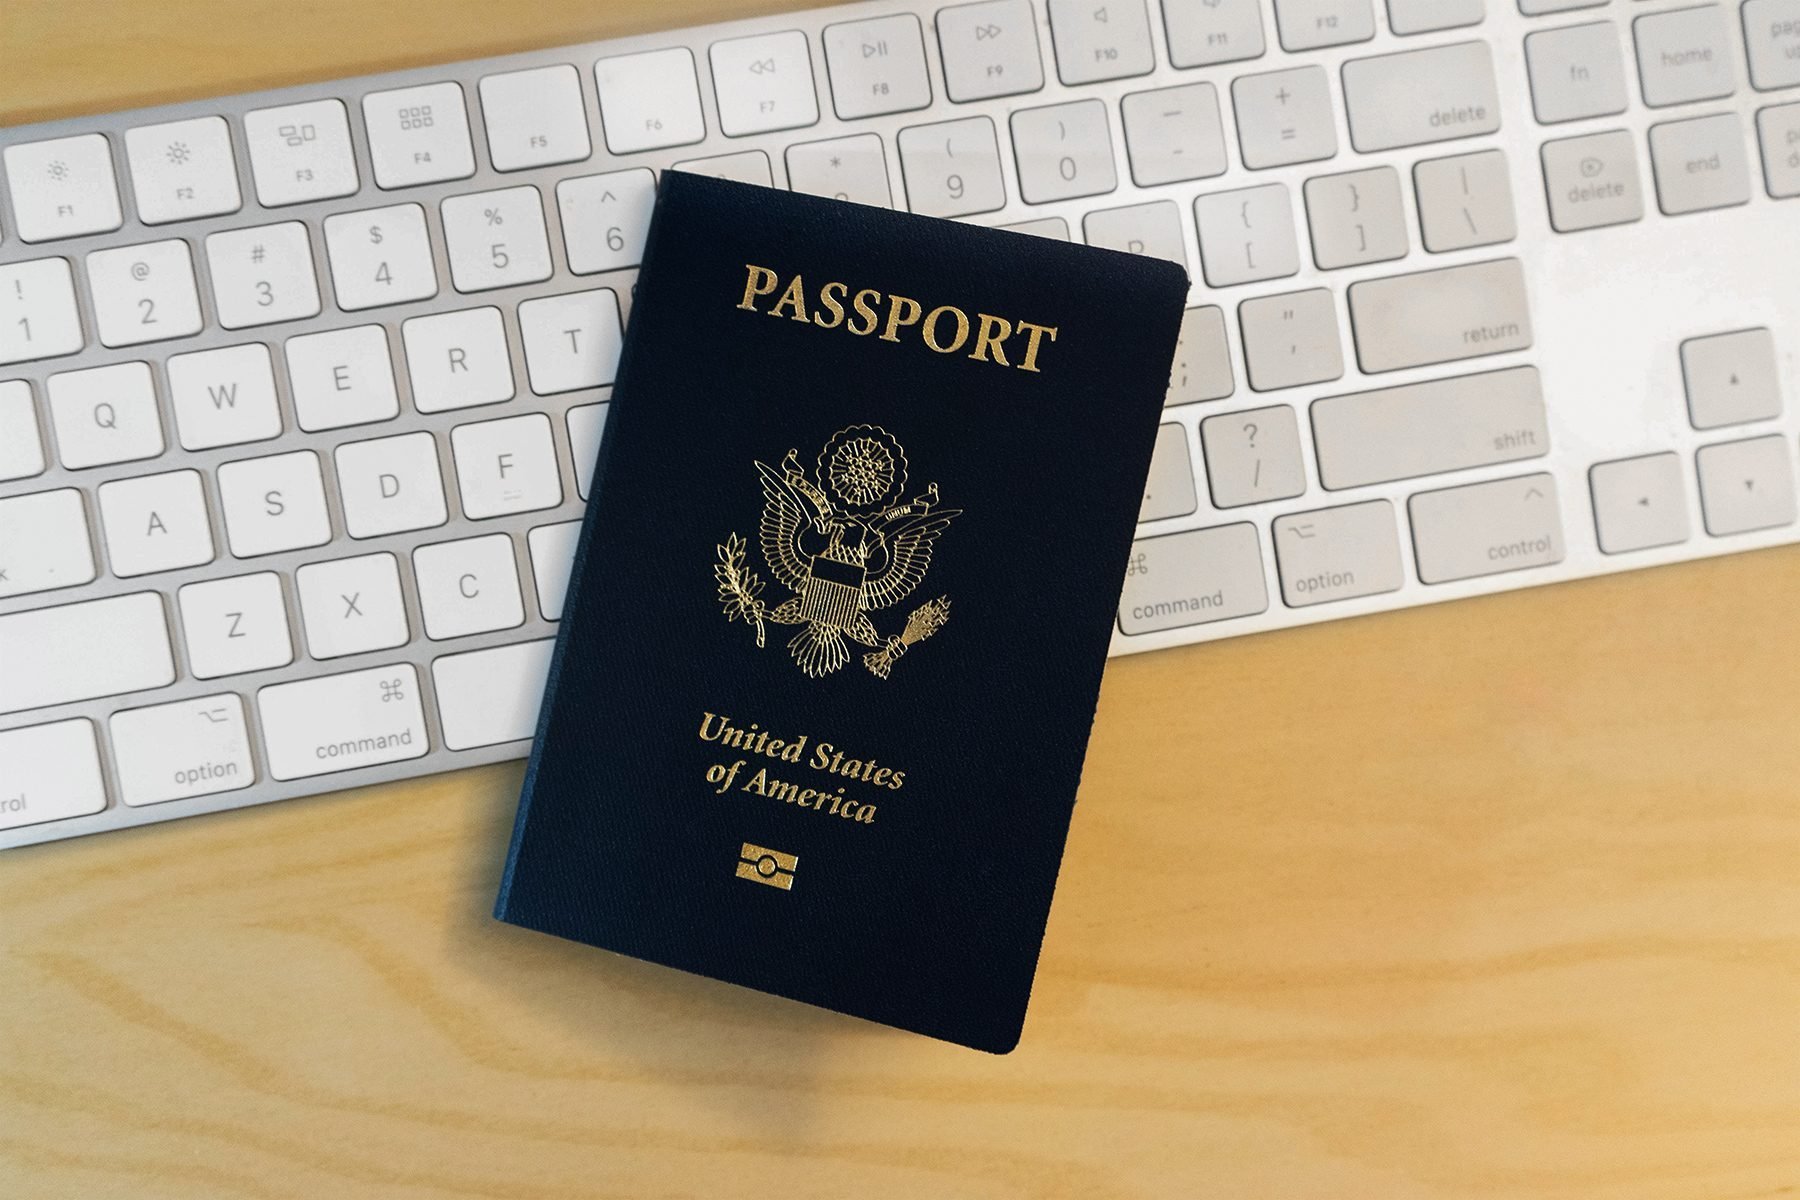 A United States passport lies on a wooden desk, partially covering a white computer keyboard. The passport is closed and its cover, displaying the U.S. emblem and the word "PASSPORT," is clearly visible.